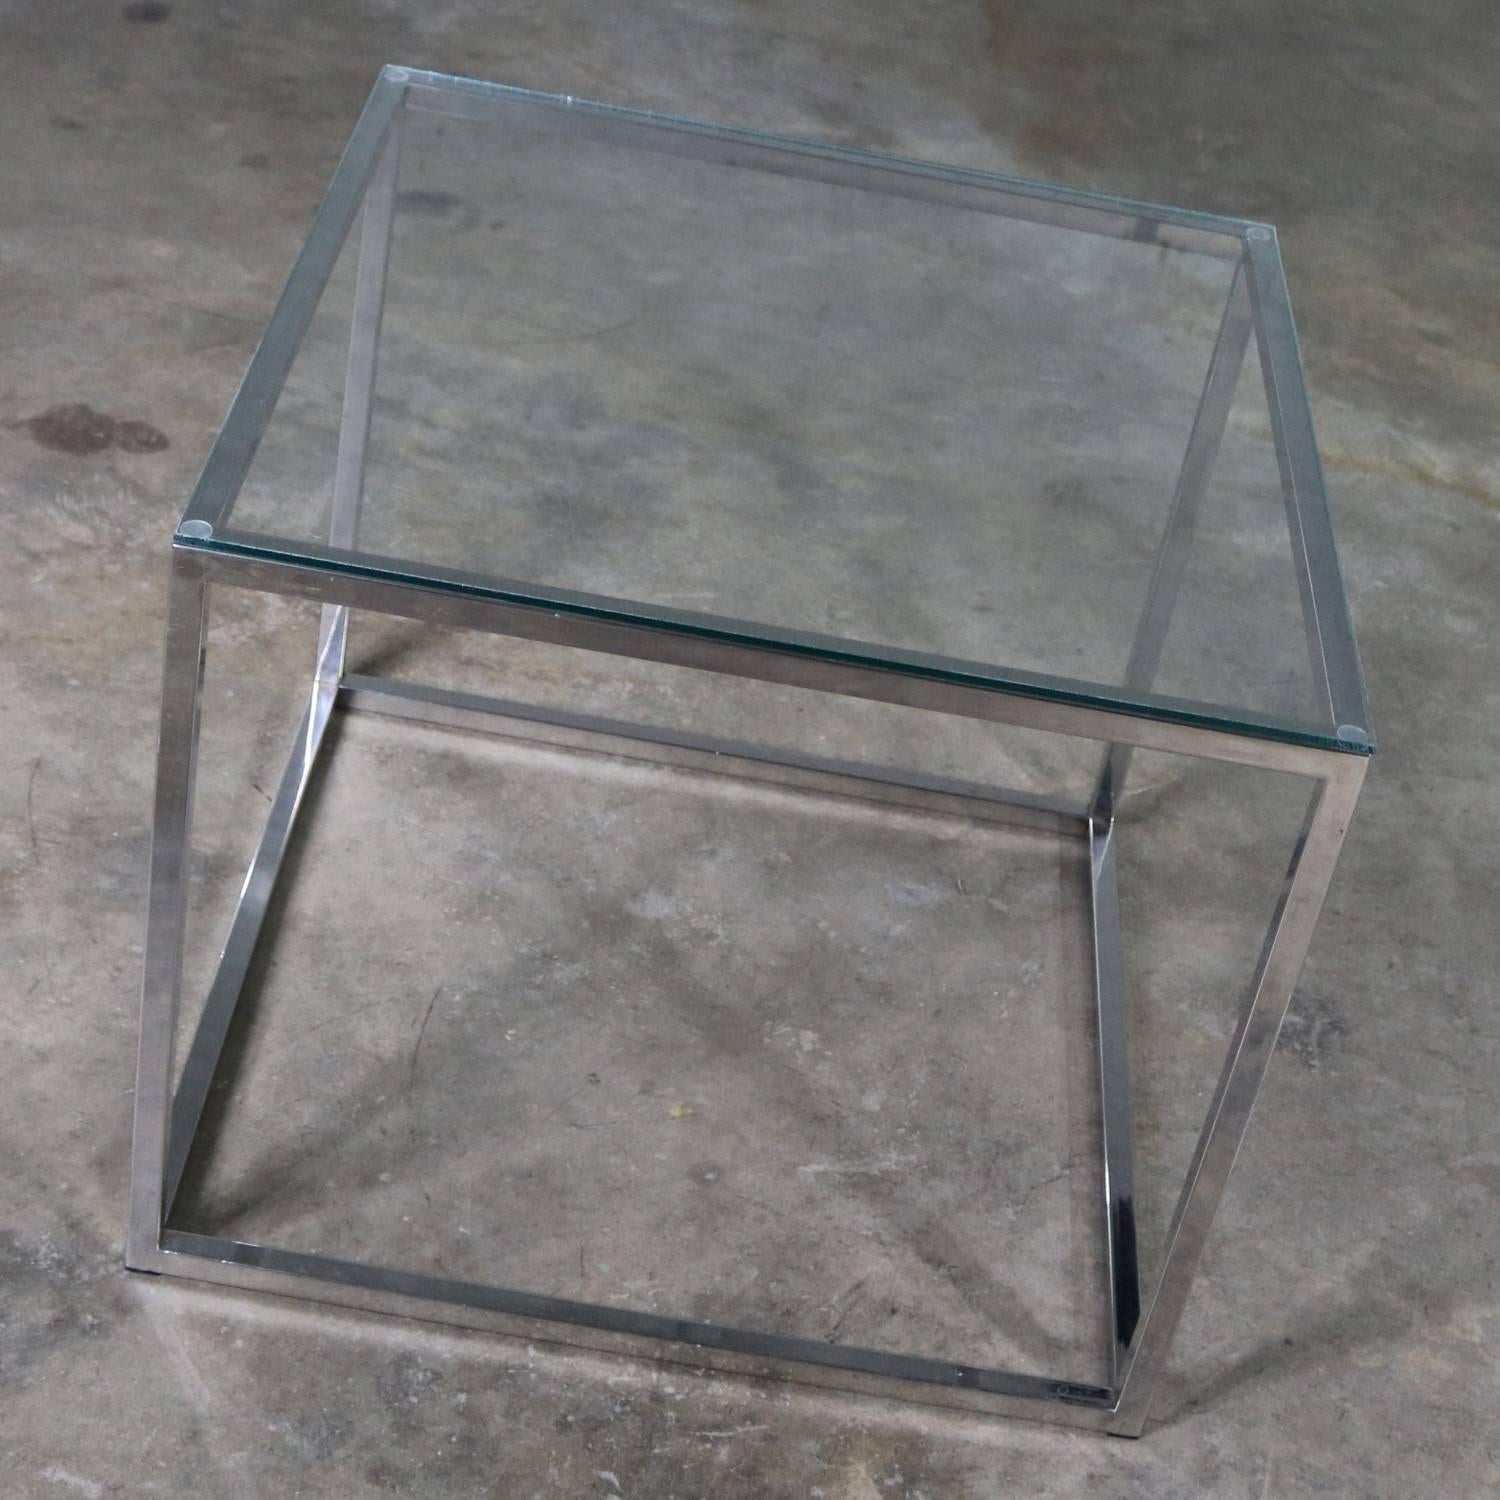 Handsome chrome cube end or side table with glass top done in the manner of Milo Baughman. This piece is in awesome vintage condition with new glass top, circa 1970s.

Simplicity at its best. This fabulous end table is done in the style of Milo